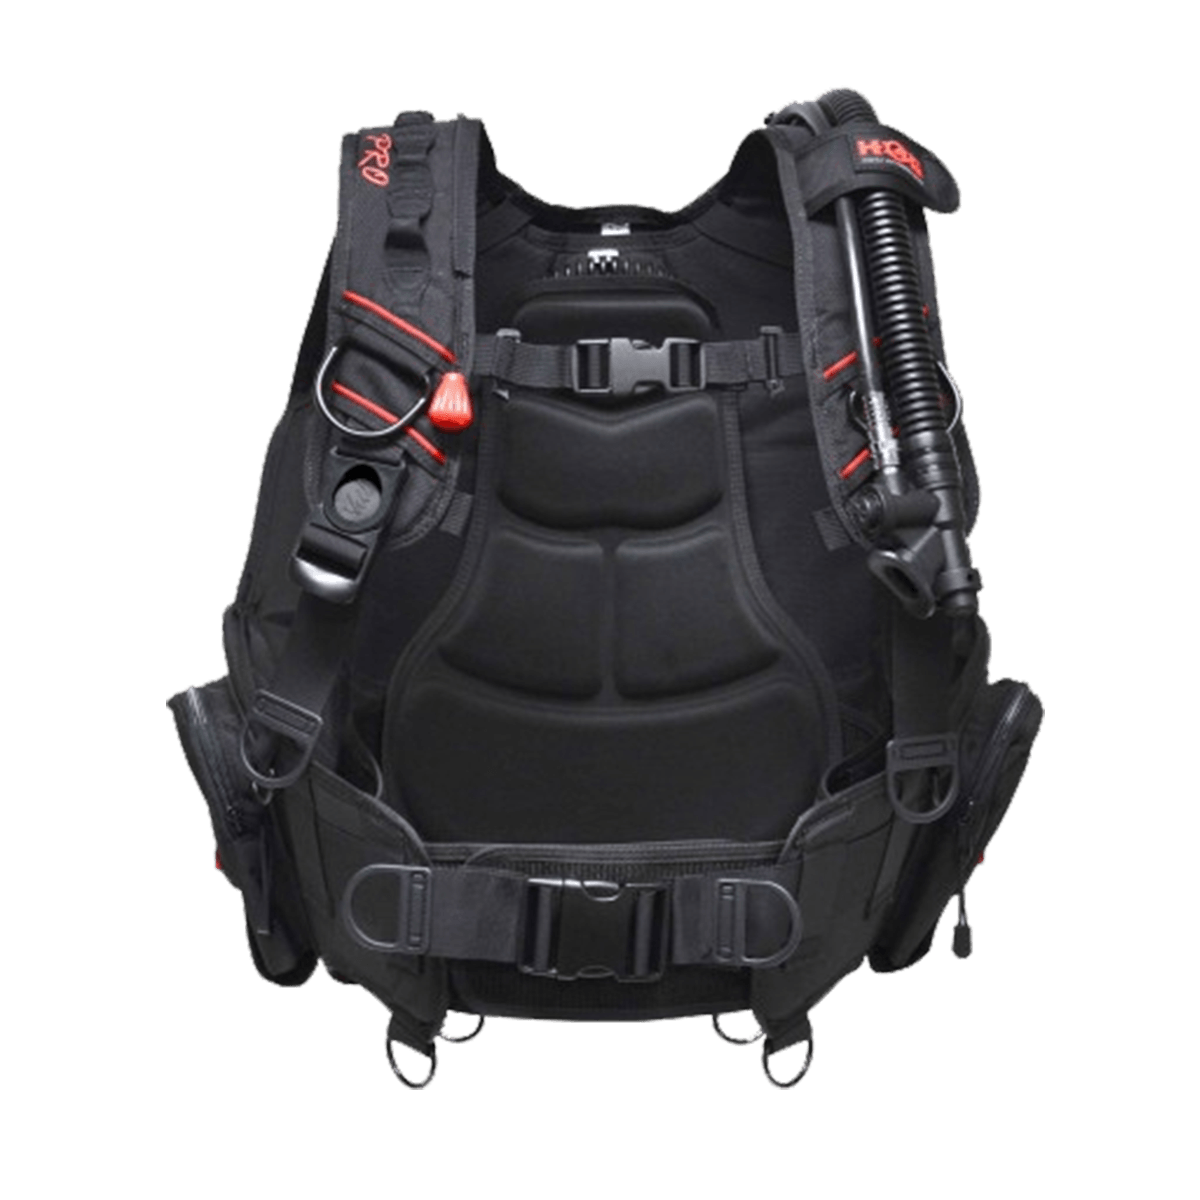 Great for Diving, Prefessional and Comfortable Weight Backpack Vest 